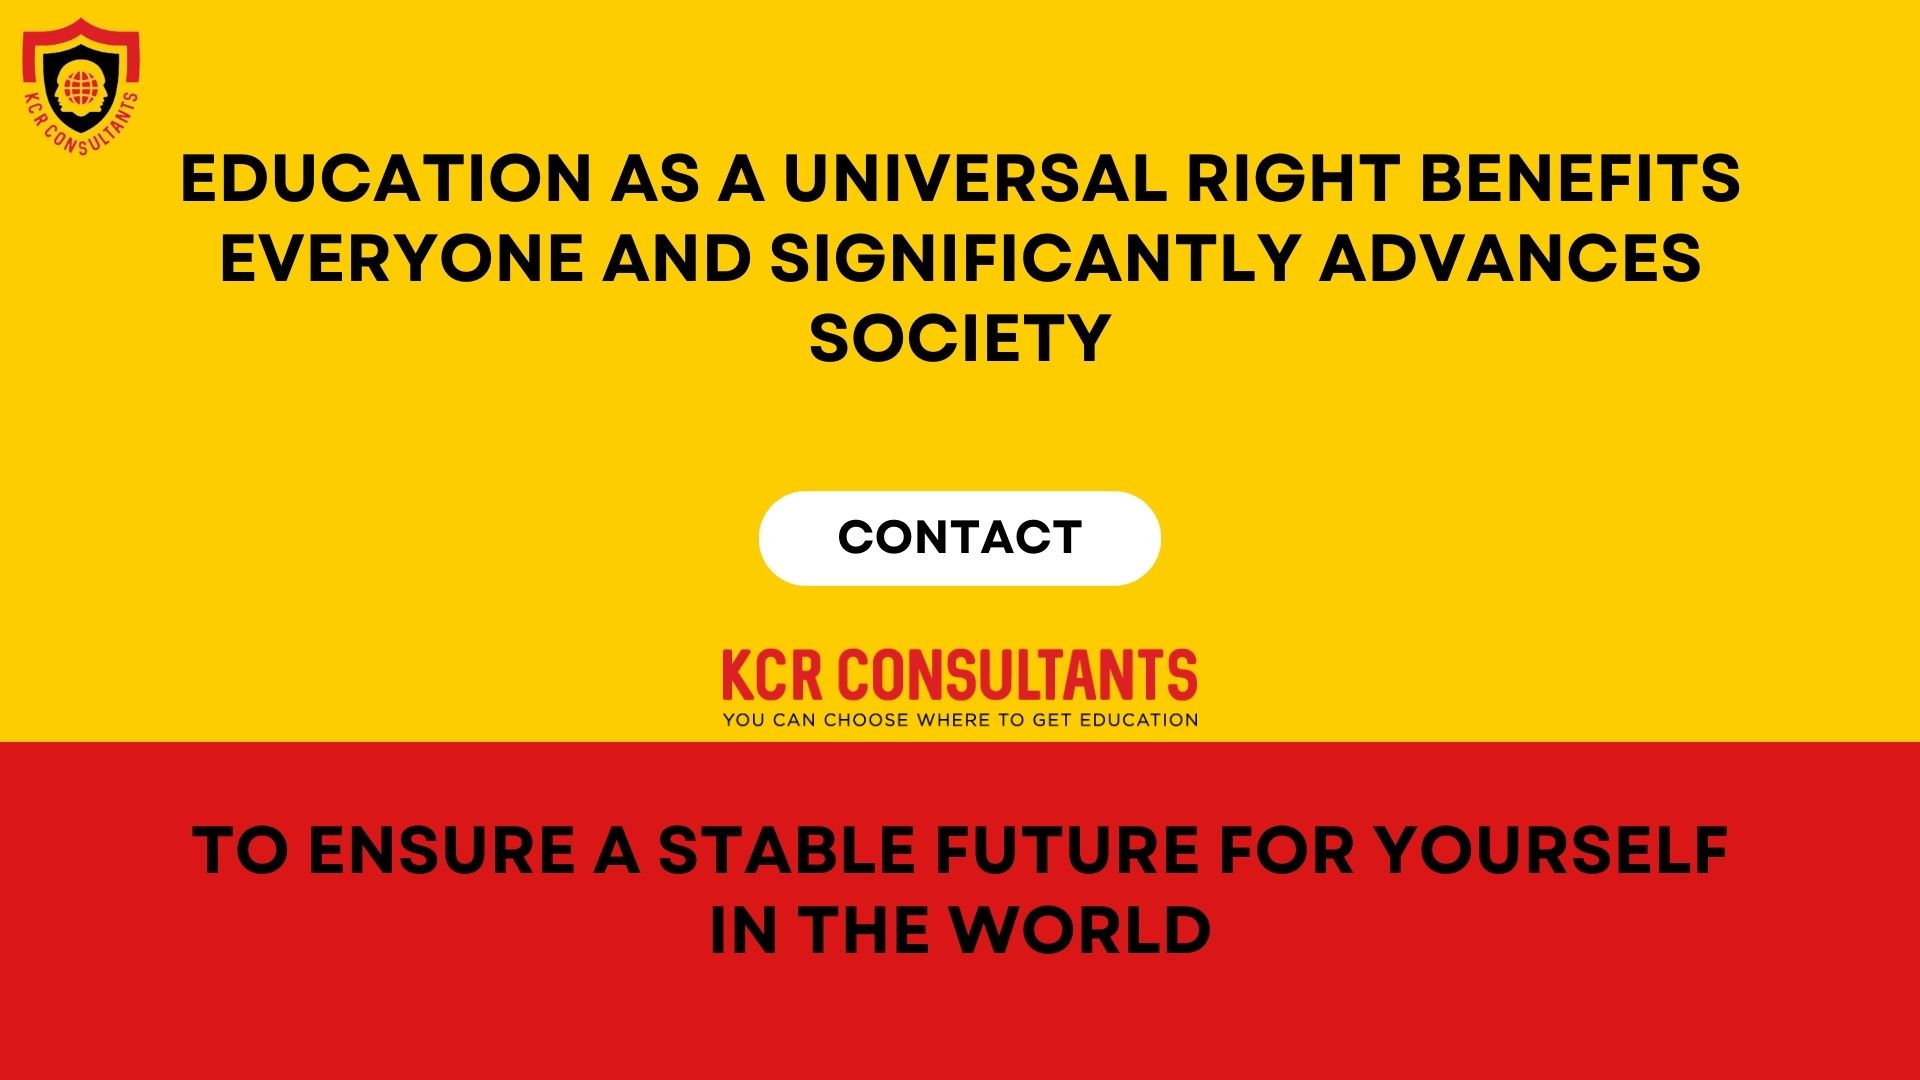 Germany Free Education - KCR CONSULTANTS - Contact us